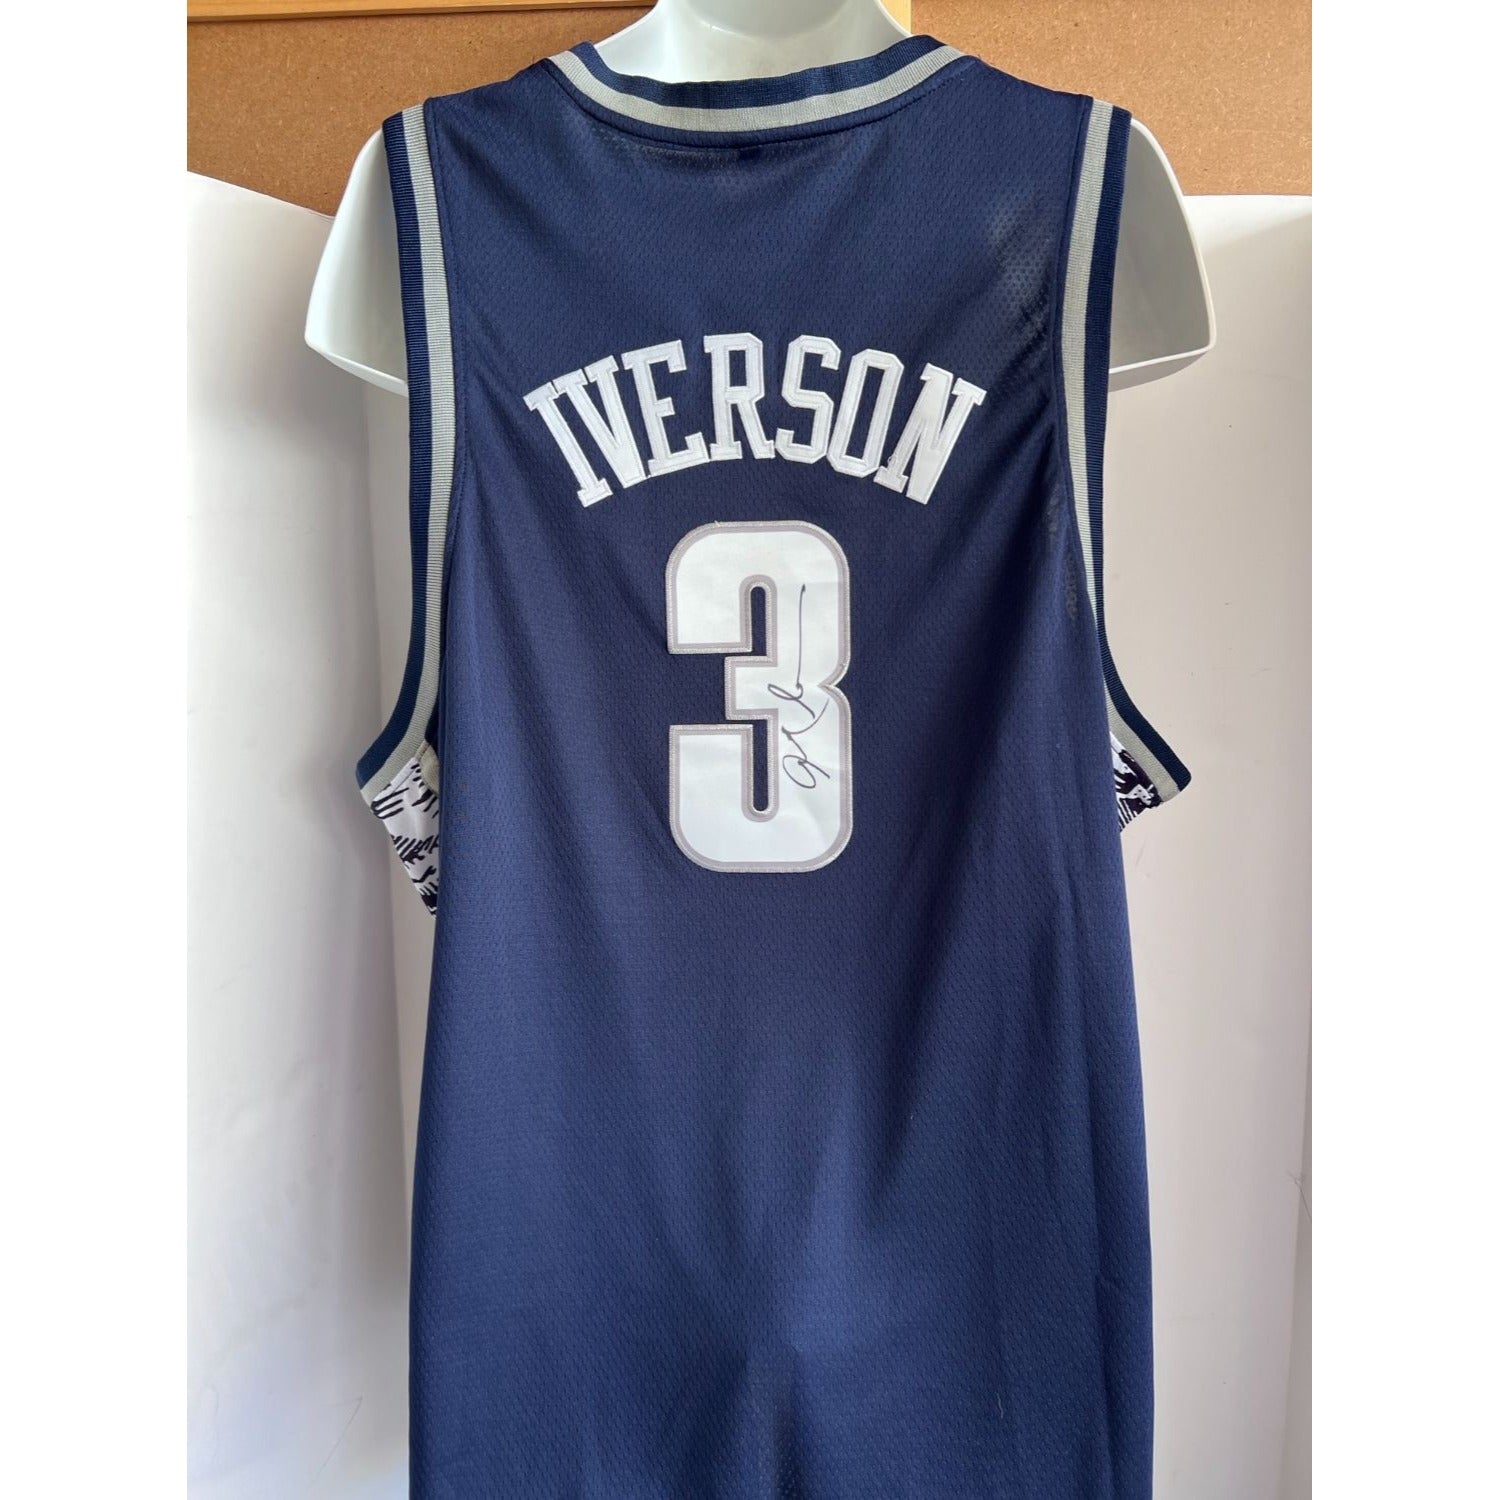 Allen Iverson Georgetown size XL game model jersey signed with proof